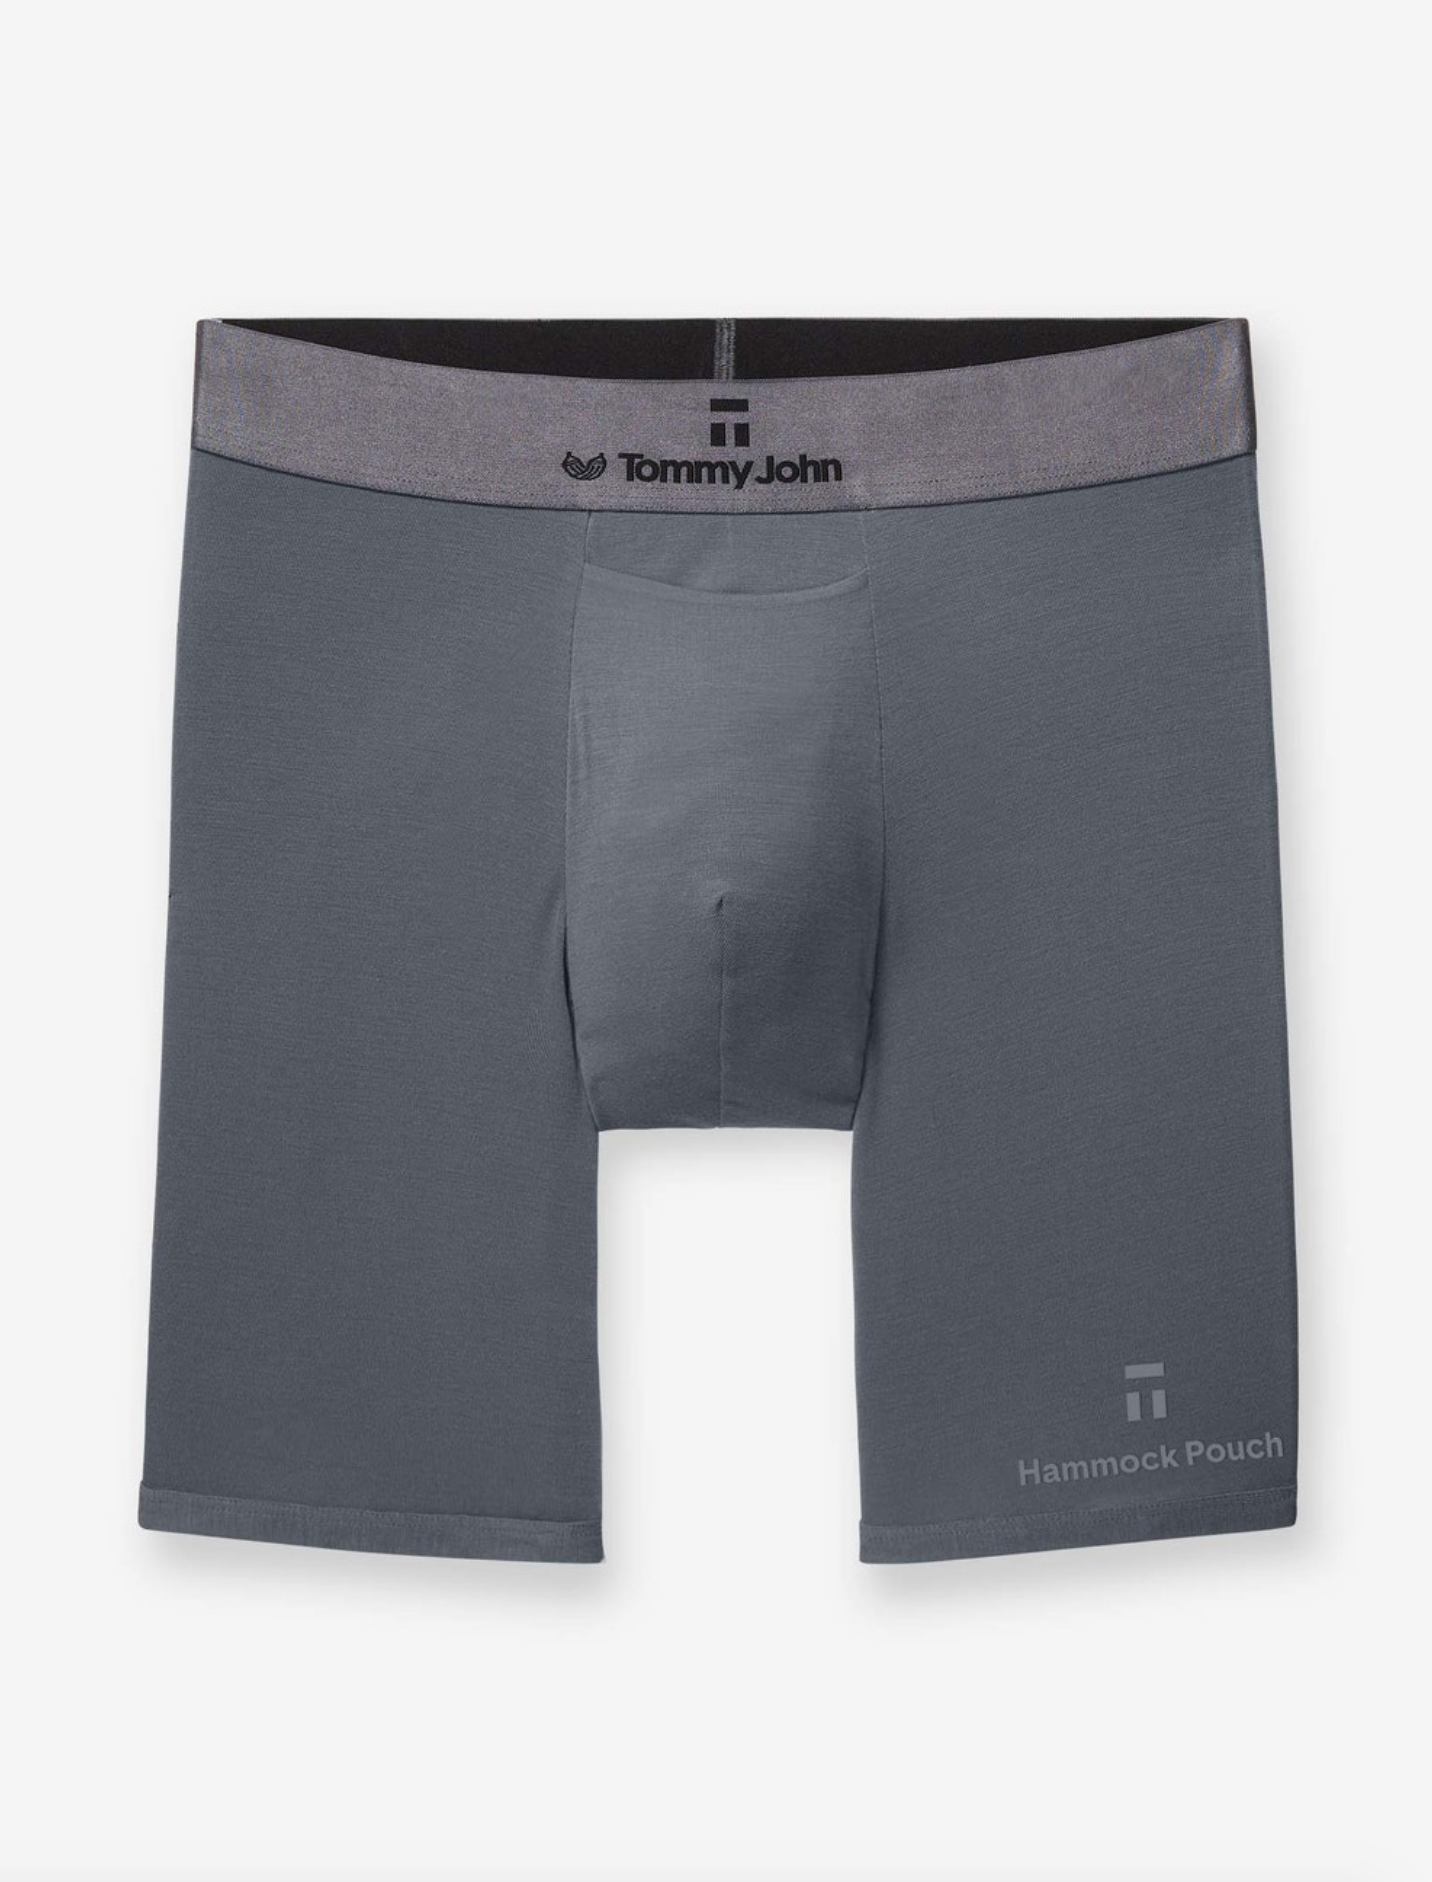 Tommy John  Second Skin Hammock Pouch Boxer Brief – CARBON